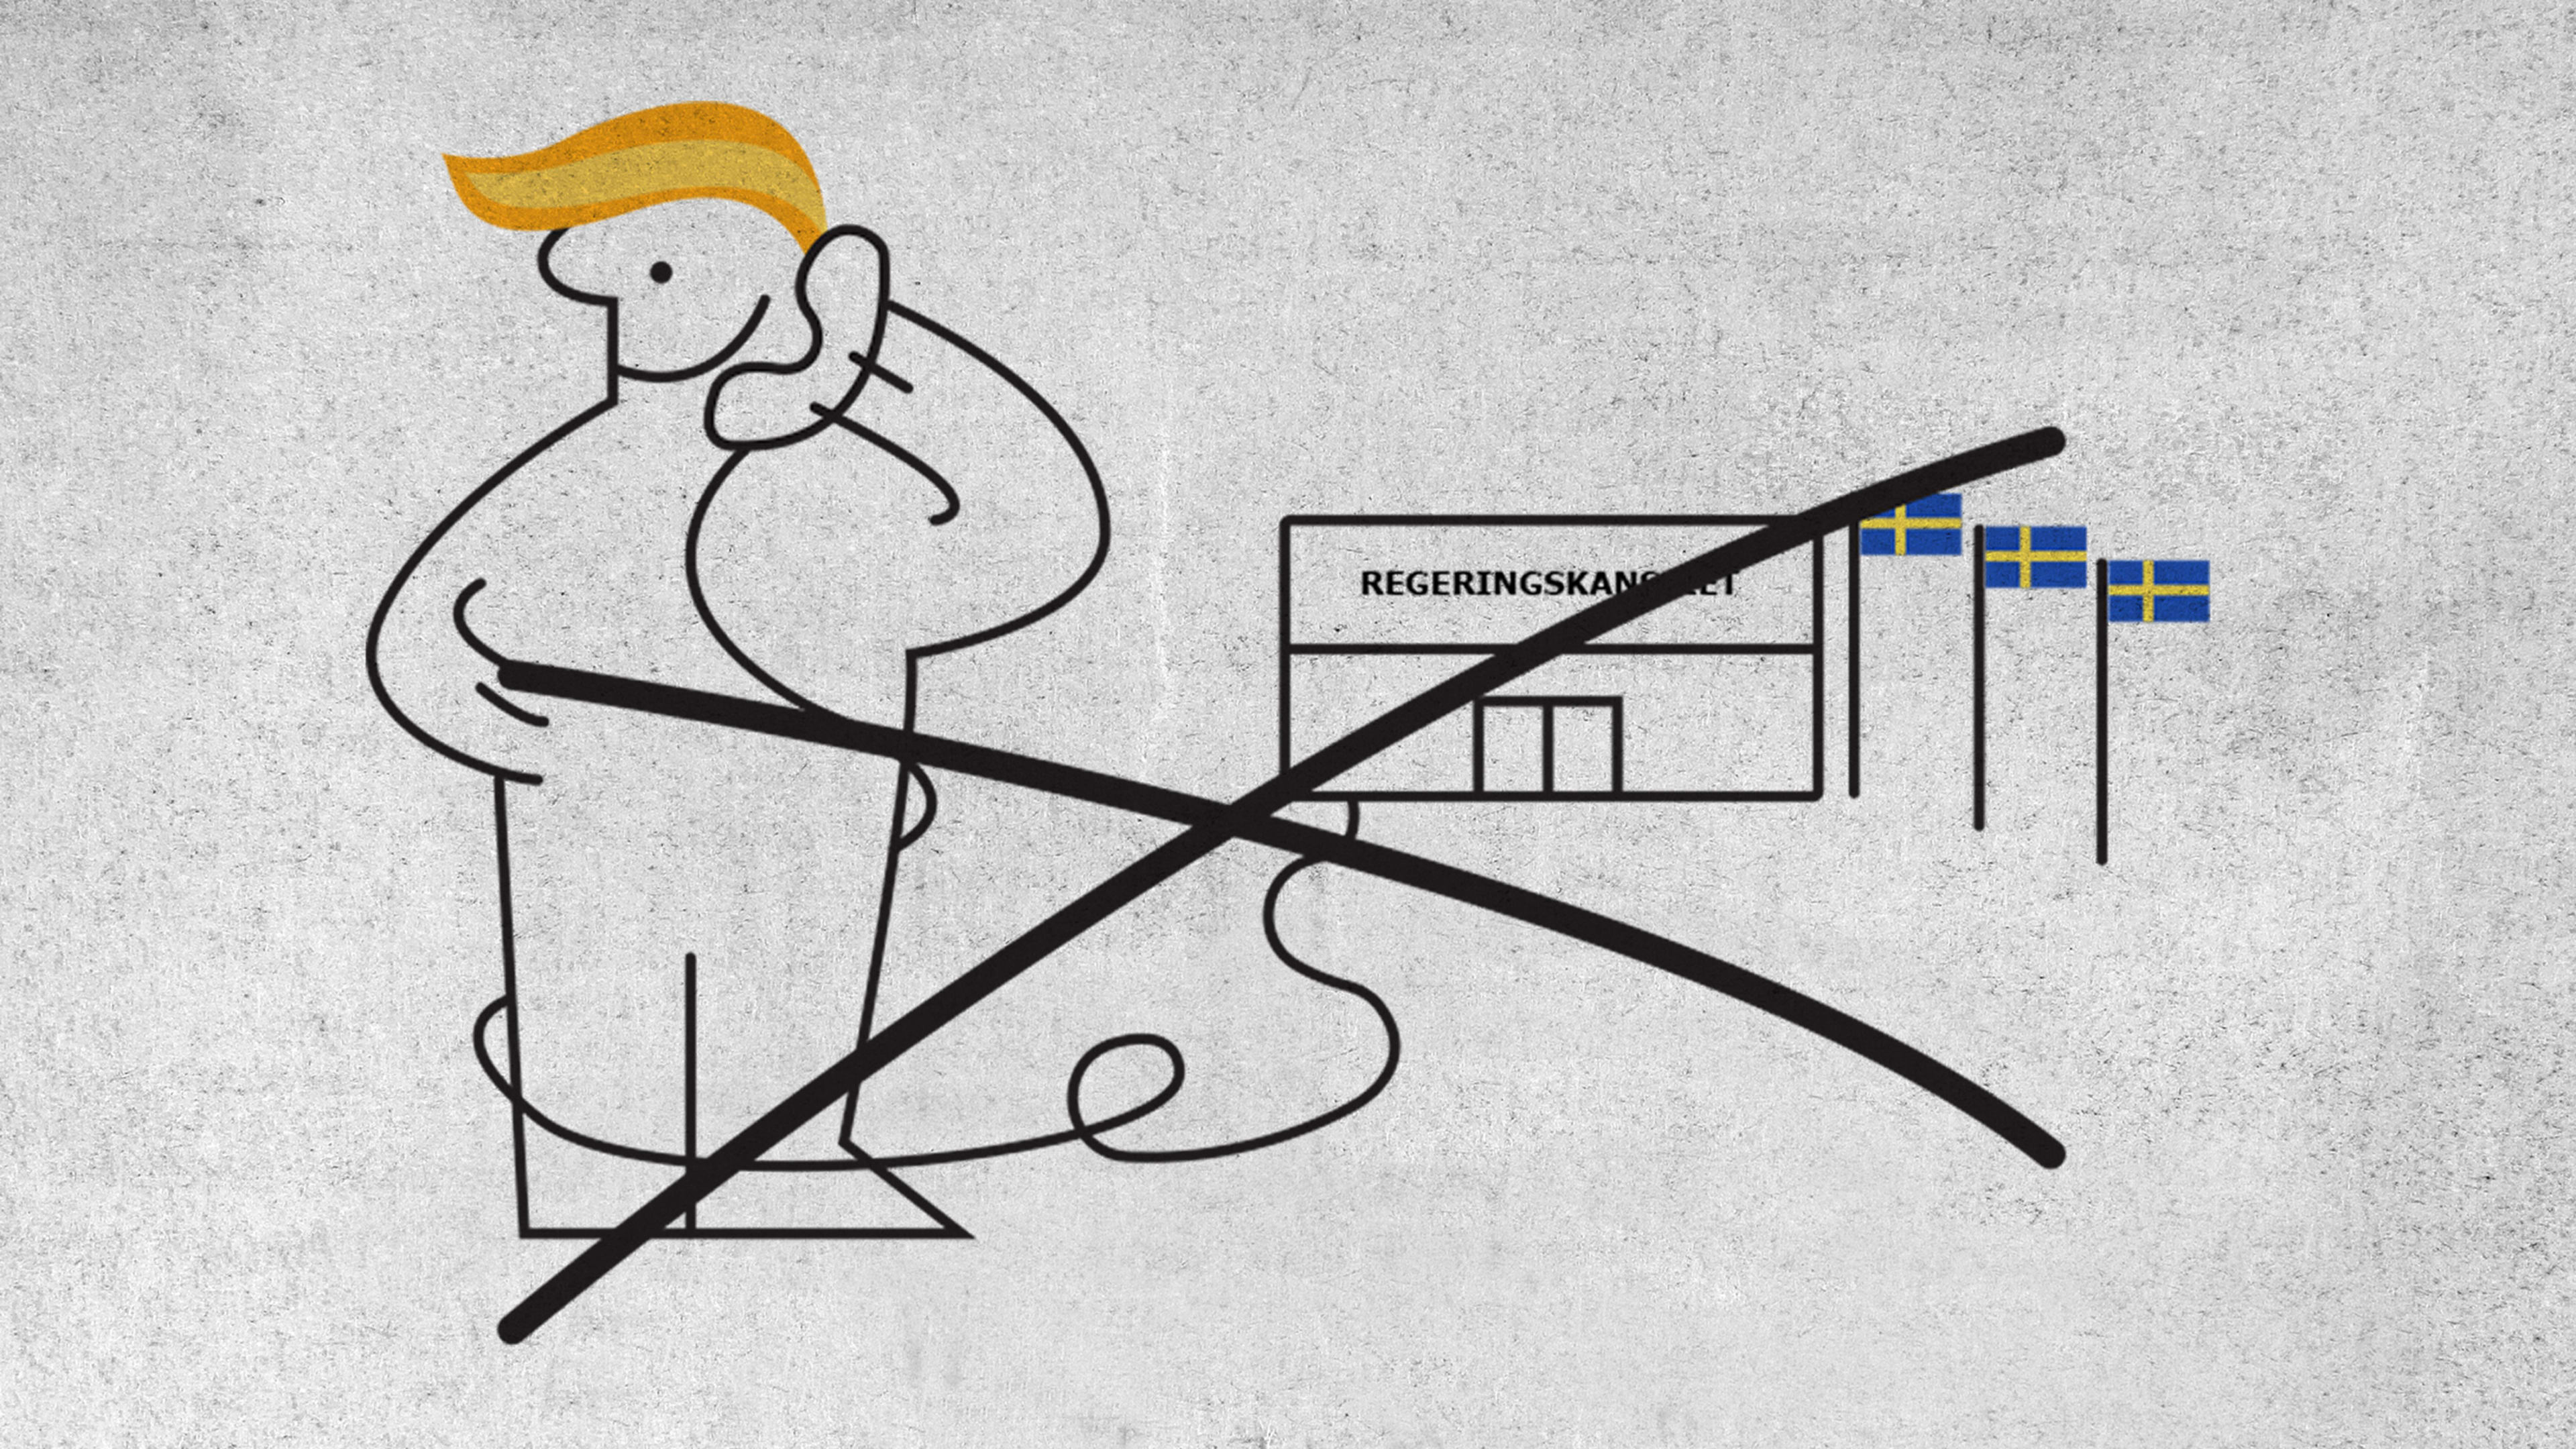 This fake Ikea manual explains Sweden’s laws to Trump in a way he’ll understand: pictures